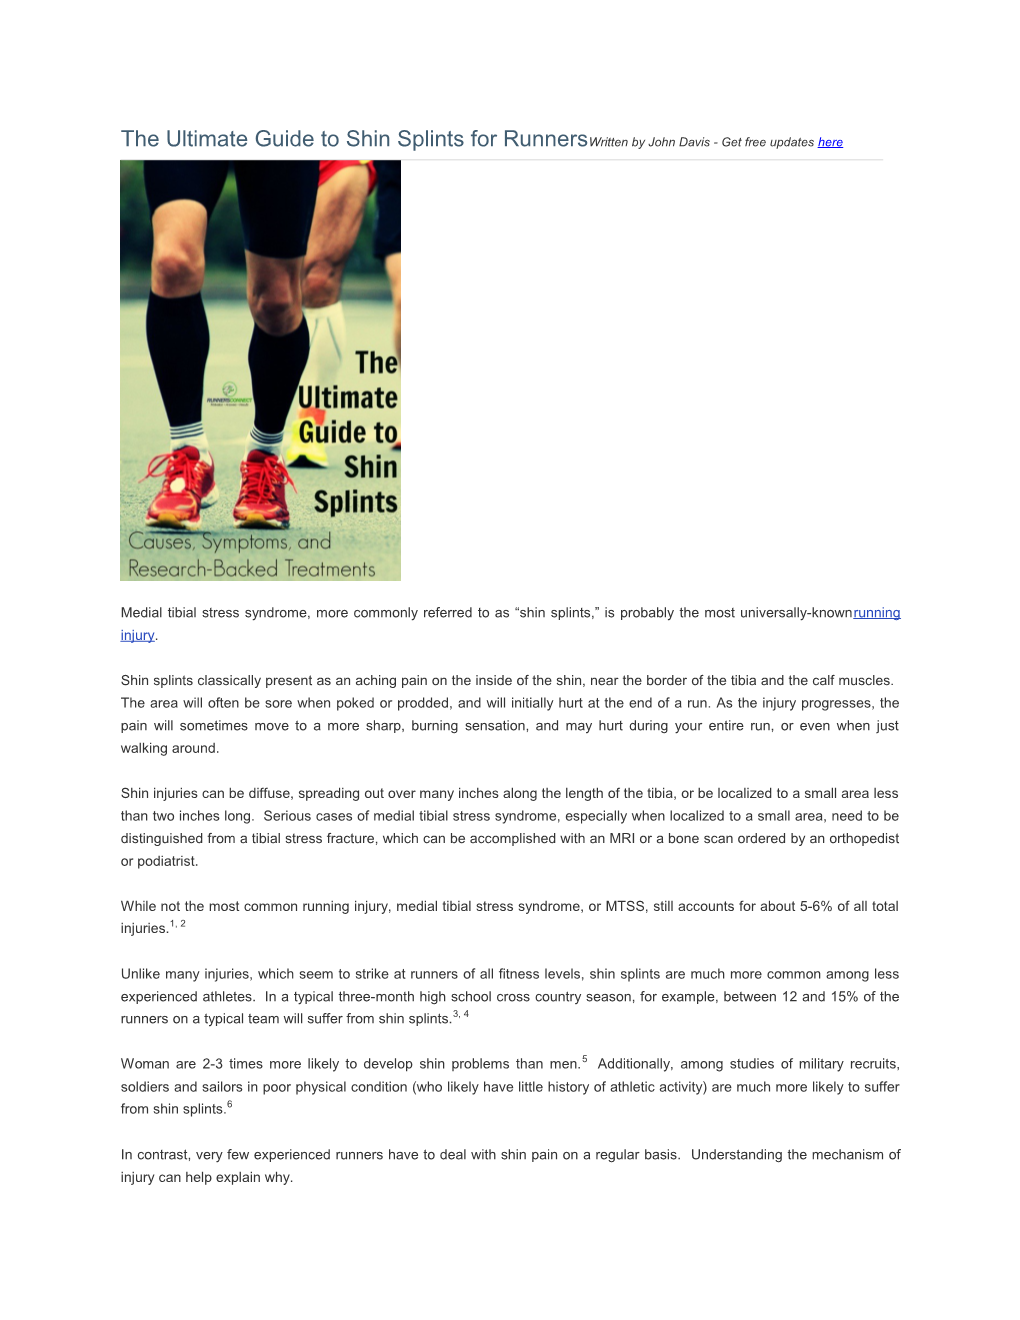 The Ultimate Guide to Shin Splints for Runners Written by John Davis - Get Free Updates Here